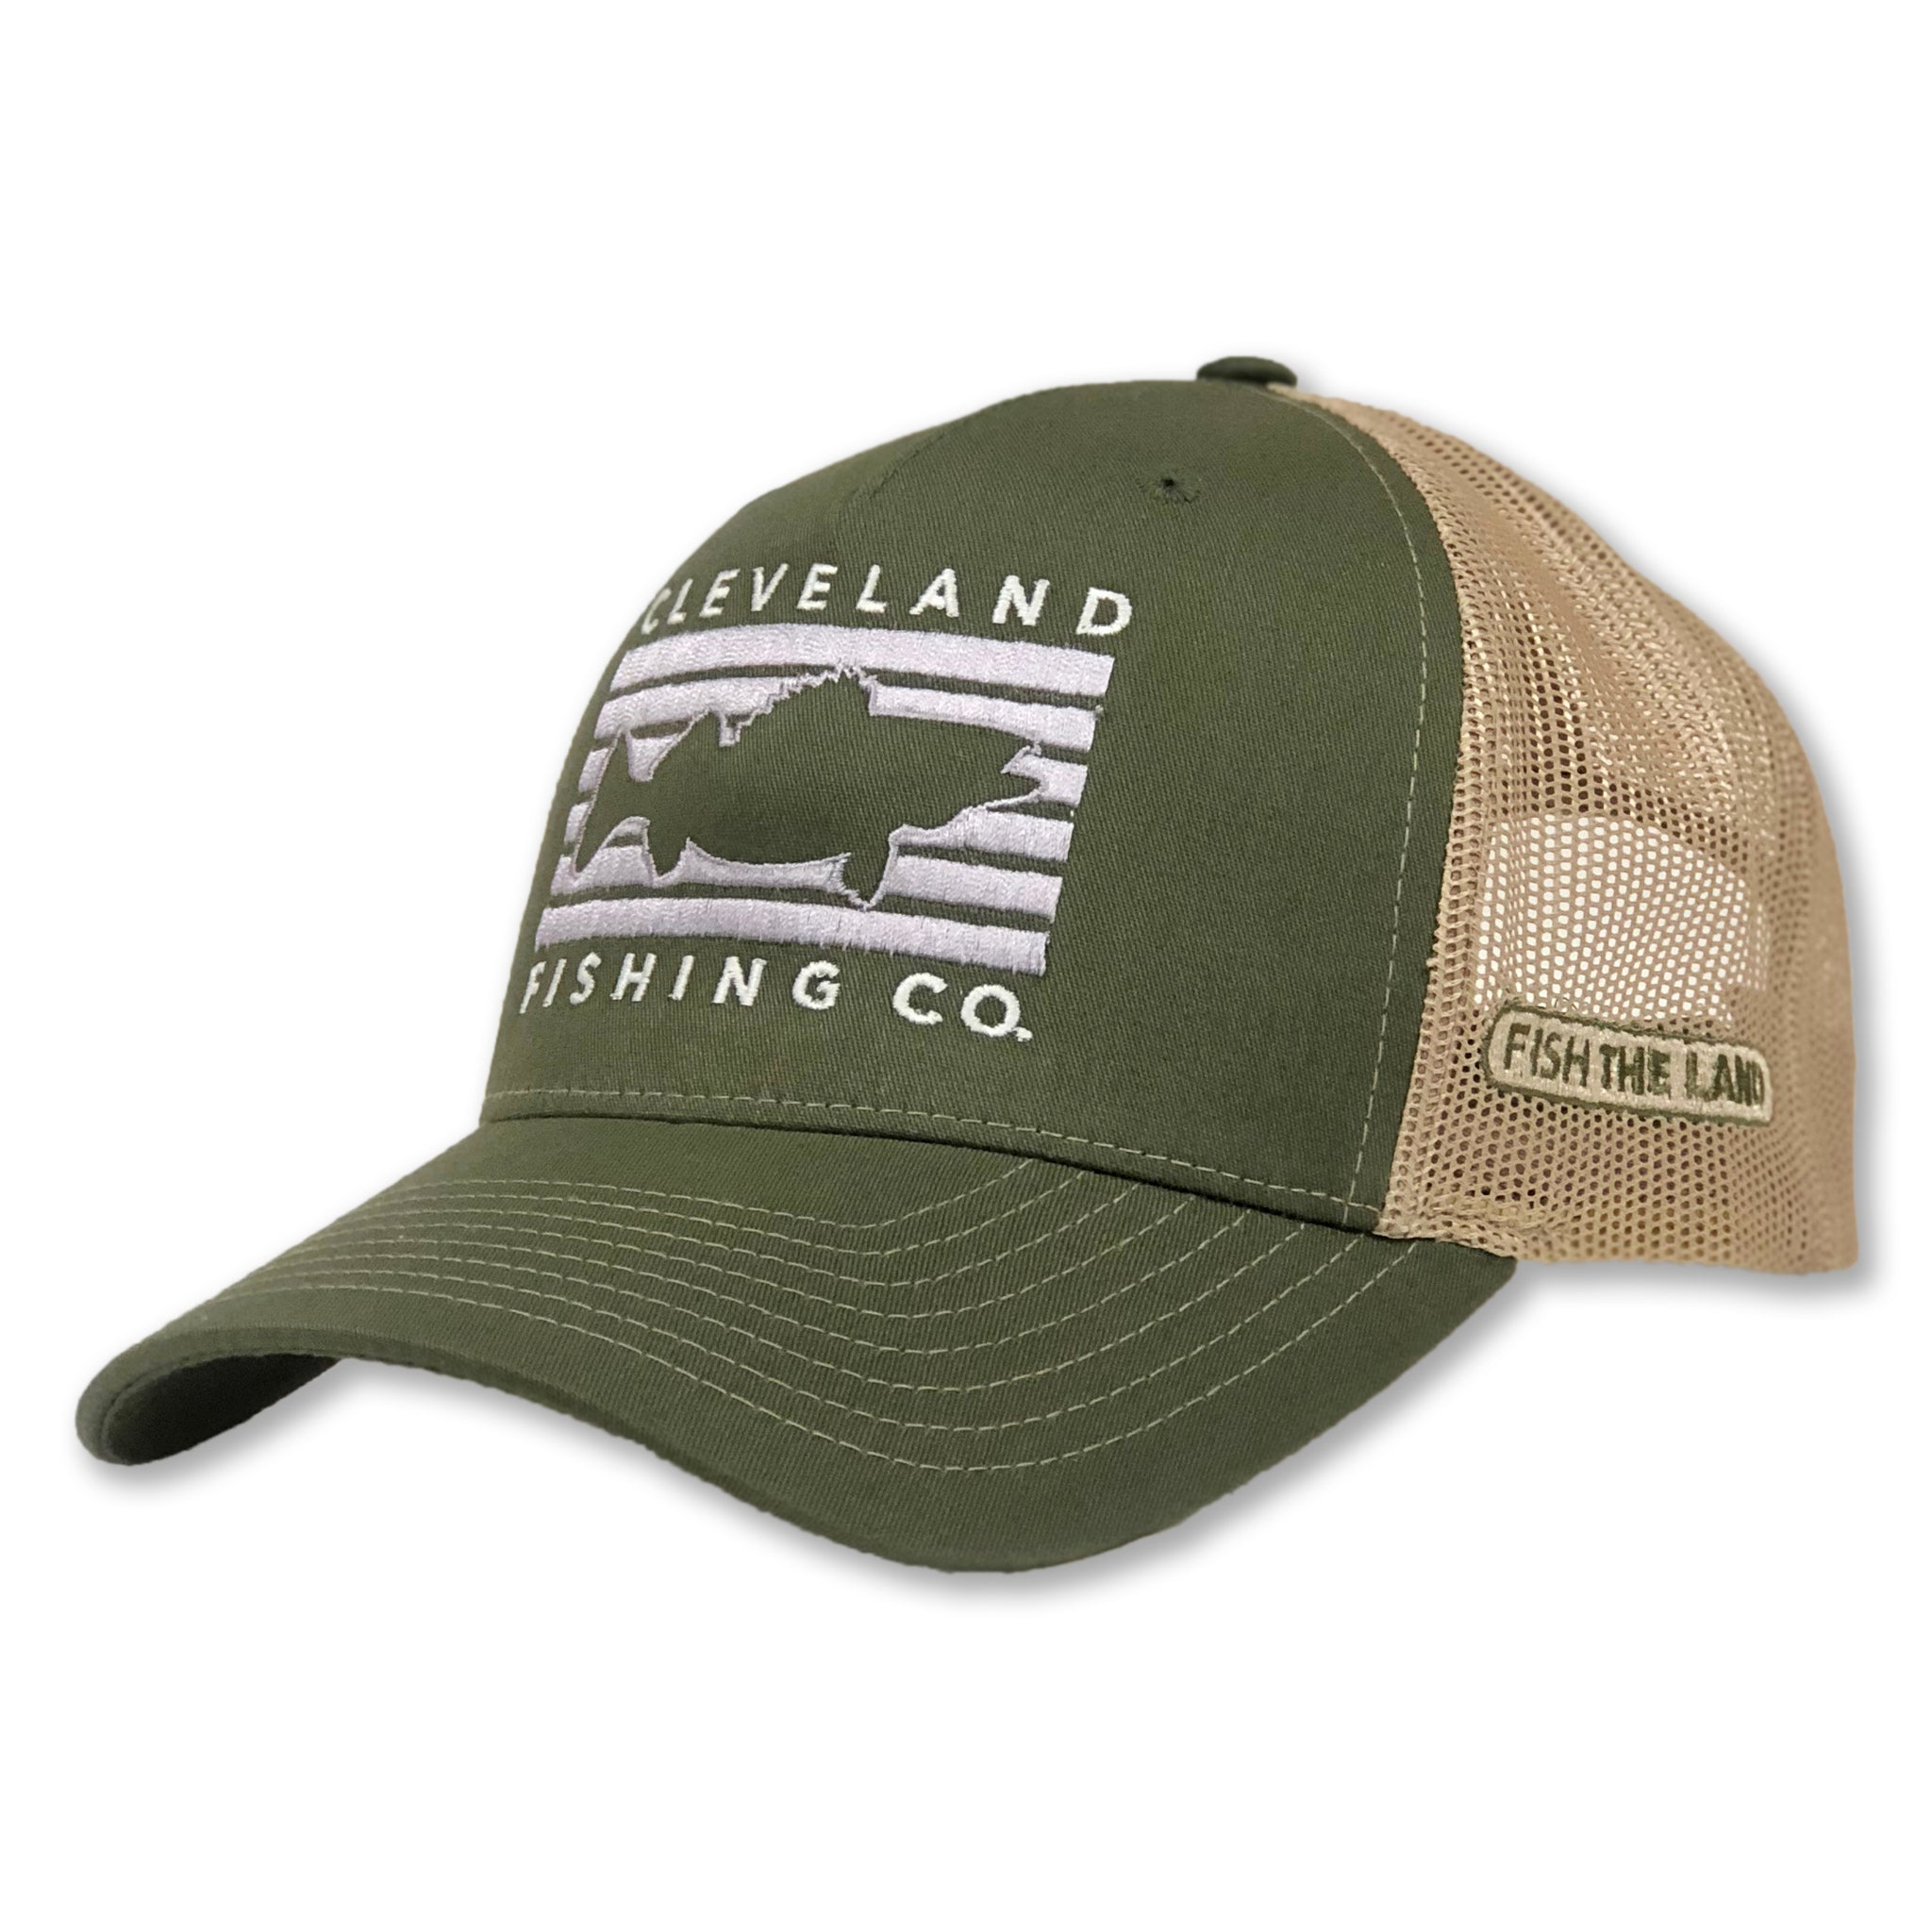 Cleveland - Fish Rectangle Hat – Fish Local